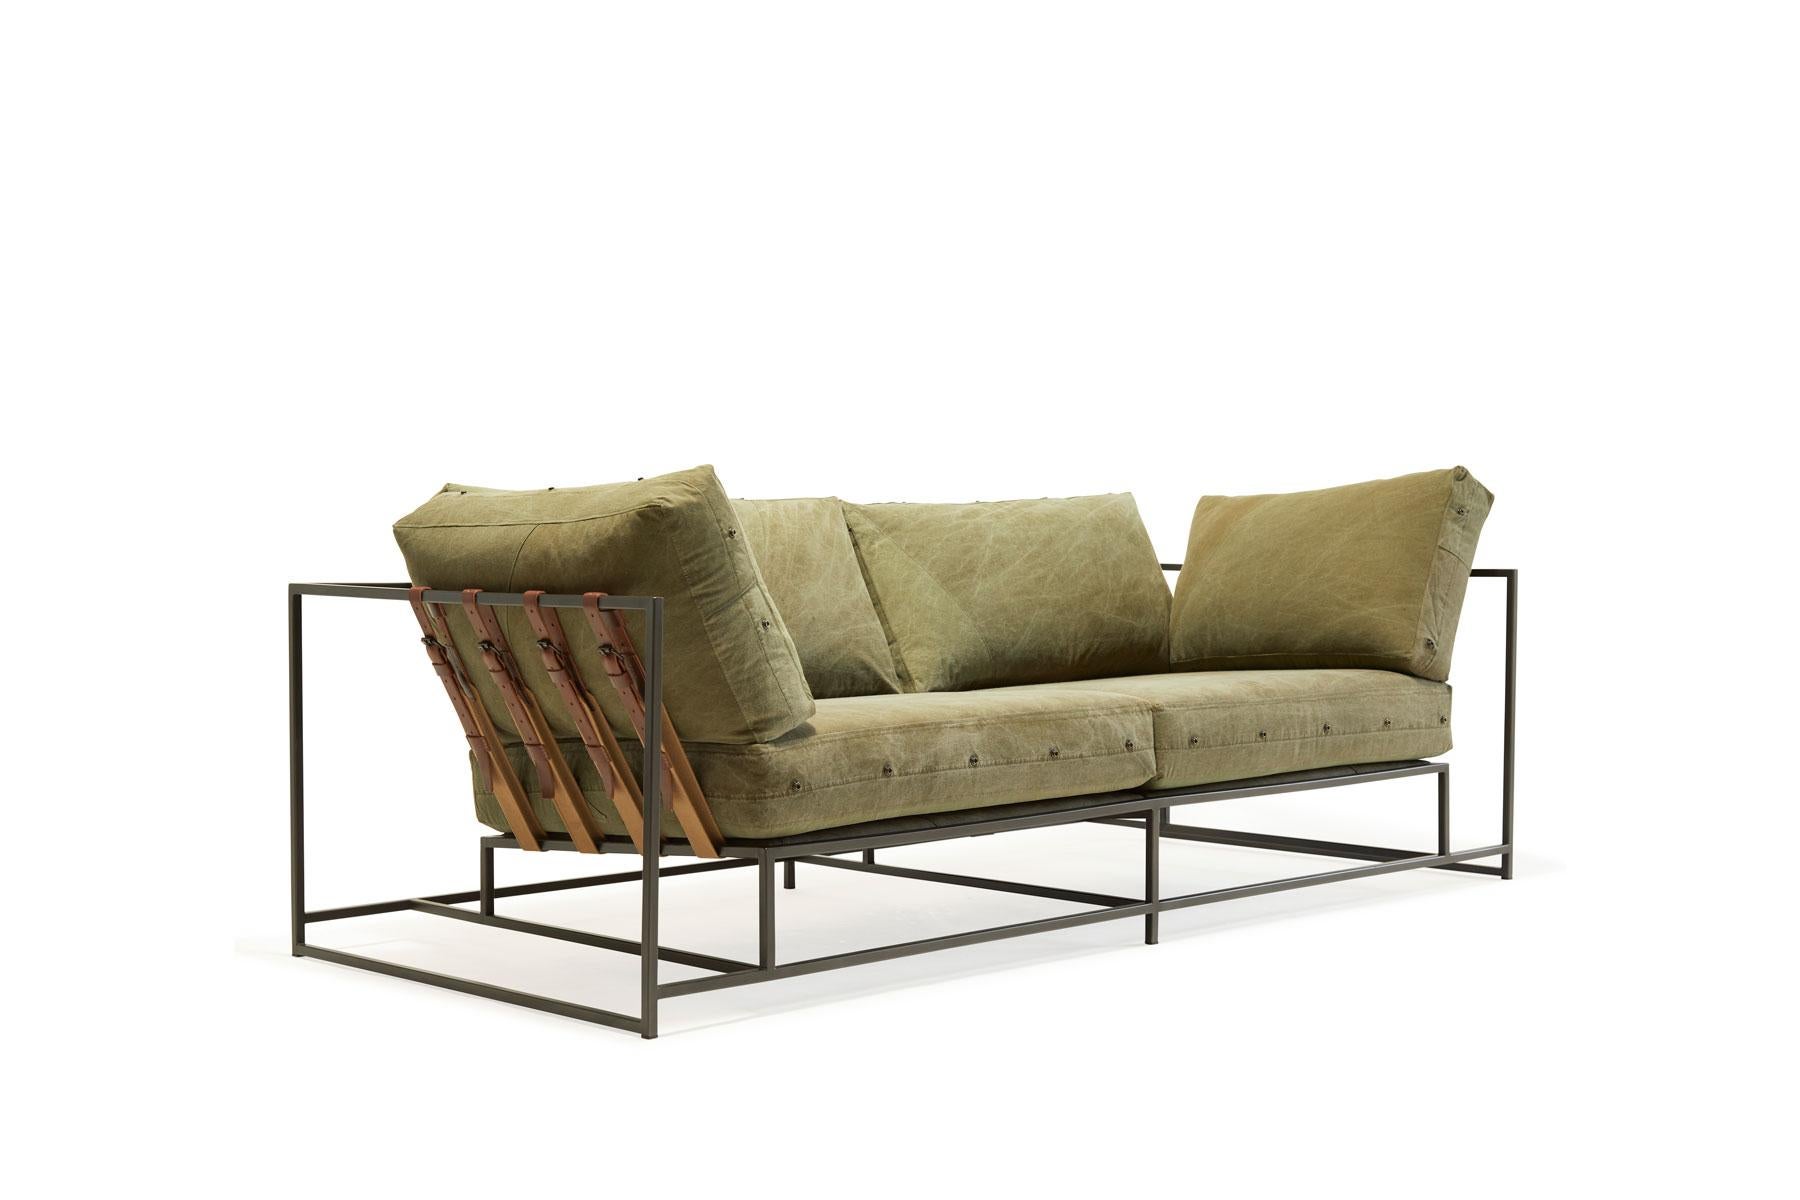 Slightly smaller in size, the two-seat sofa is ideal for apartments or smaller spaces requiring a smaller footprint.

Since first designing Inheritance collection, Stephen Kenn has been inspired by the inherent history in vintage military-issue